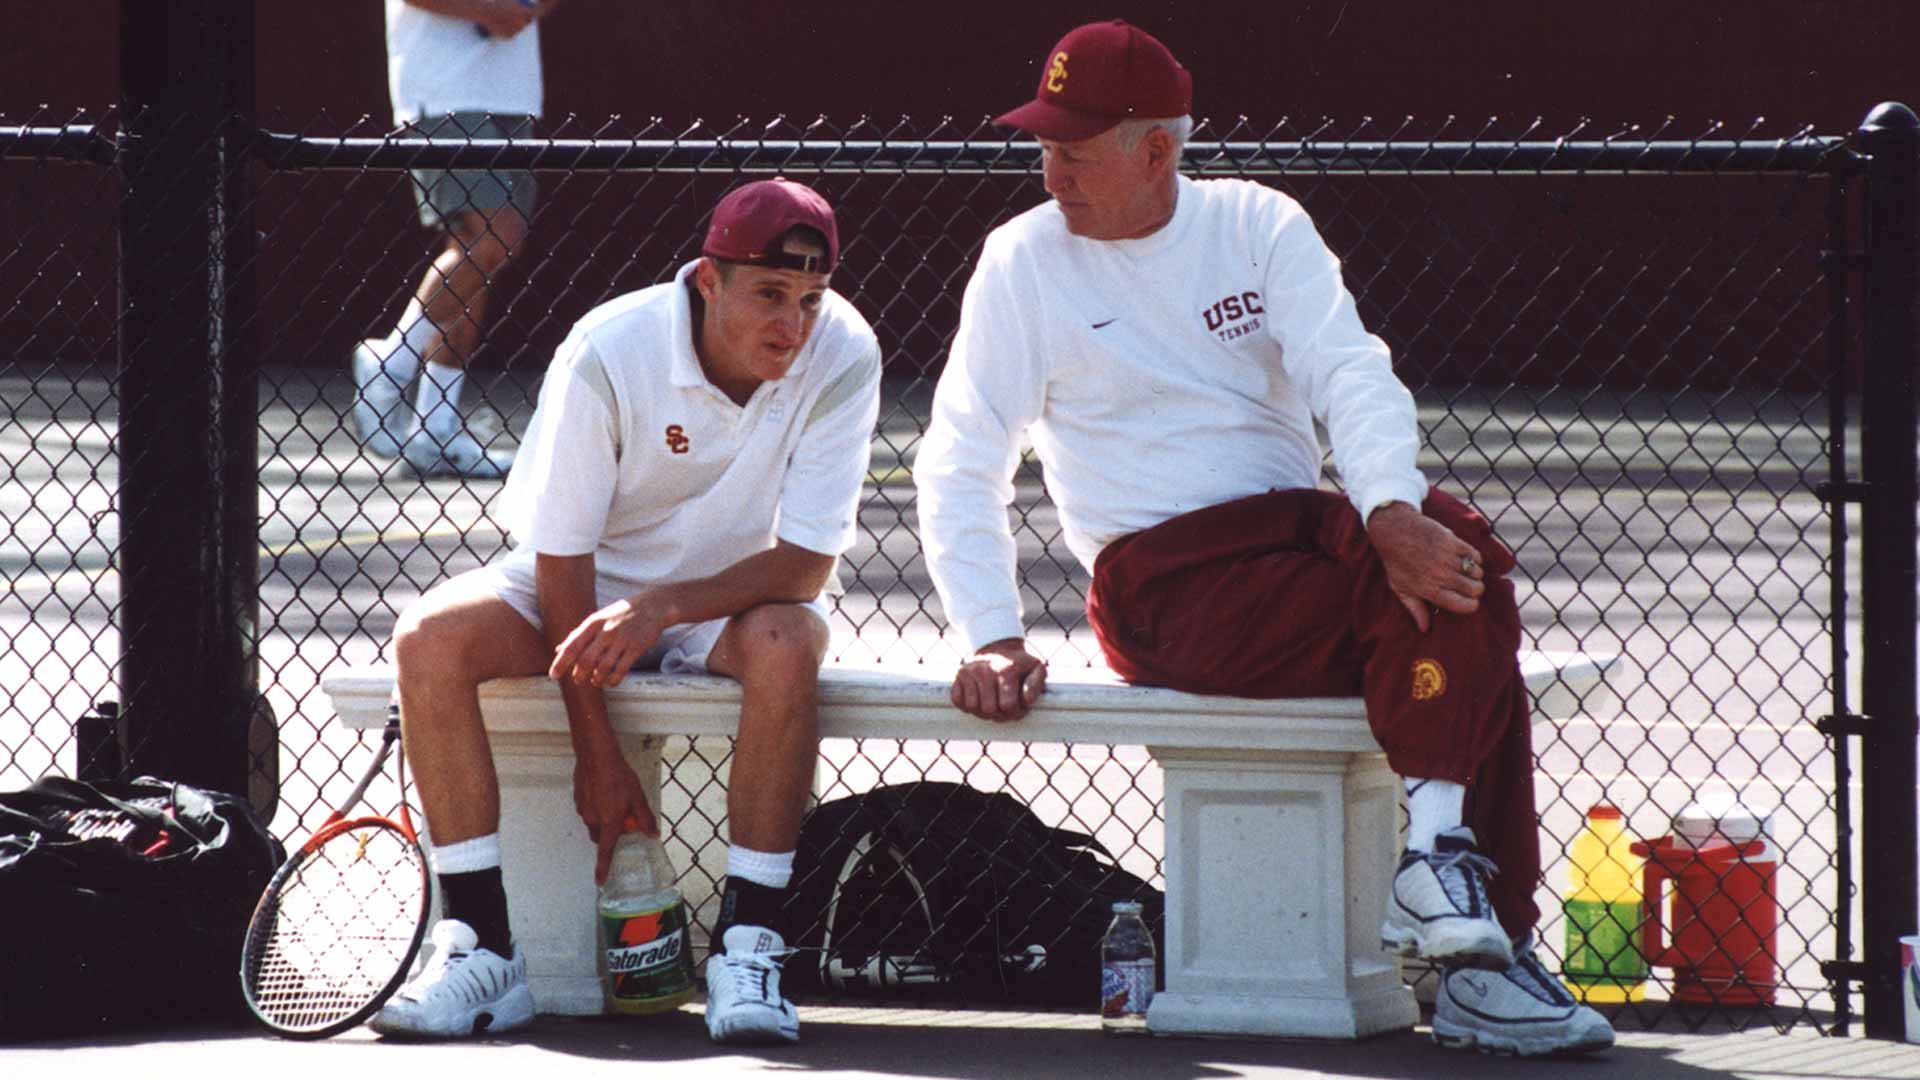 Dick Leach with former USC player Damien Spizzo.